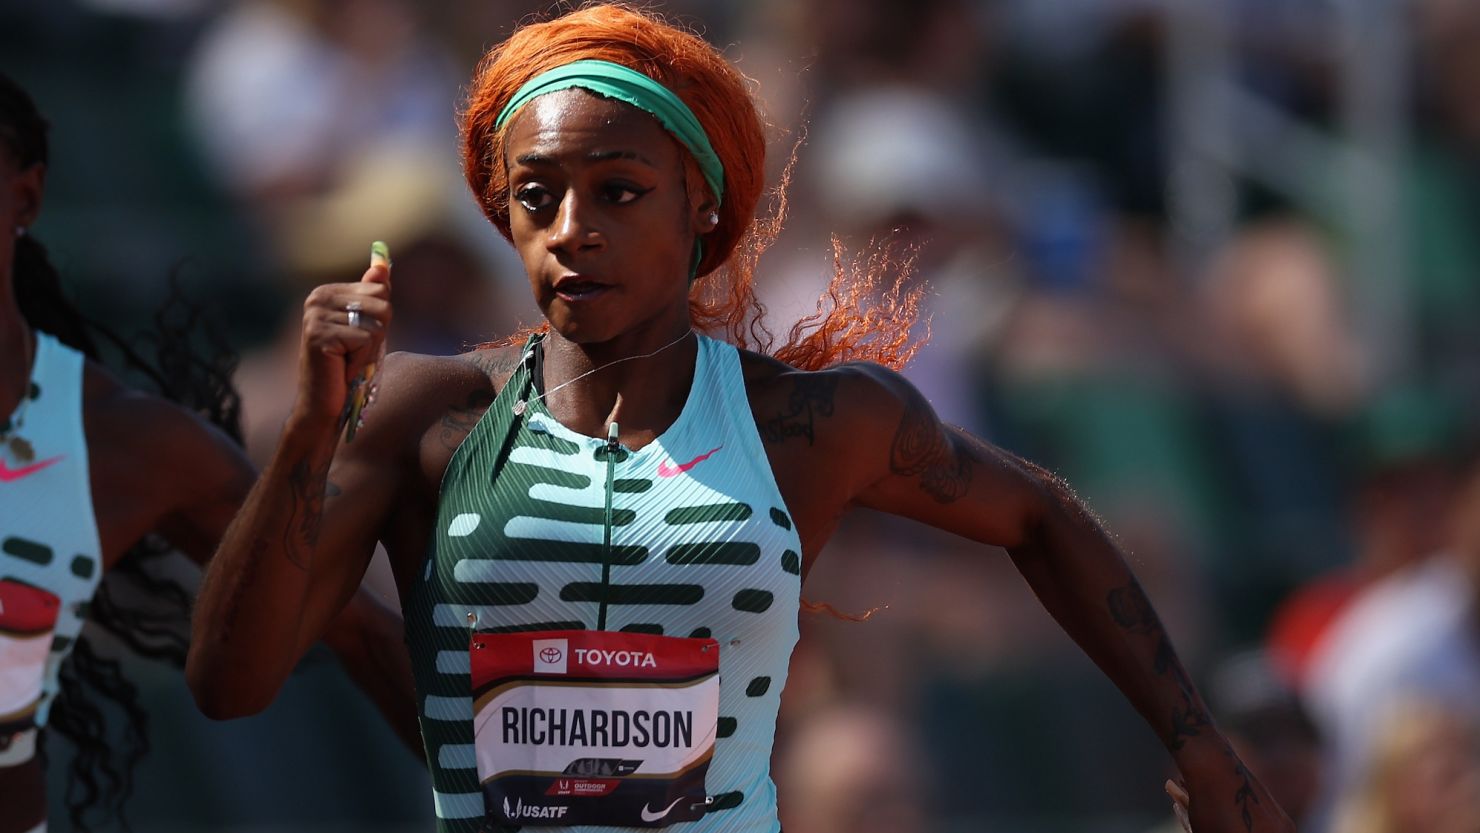 EUGENE, OREGON - JULY 06: Sha'Carri Richardson competes in the Women's 100m during the 2023 USATF Outdoor Championships at Hayward Field on July 06, 2023 in Eugene, Oregon. (Photo by Christian Petersen/Getty Images)